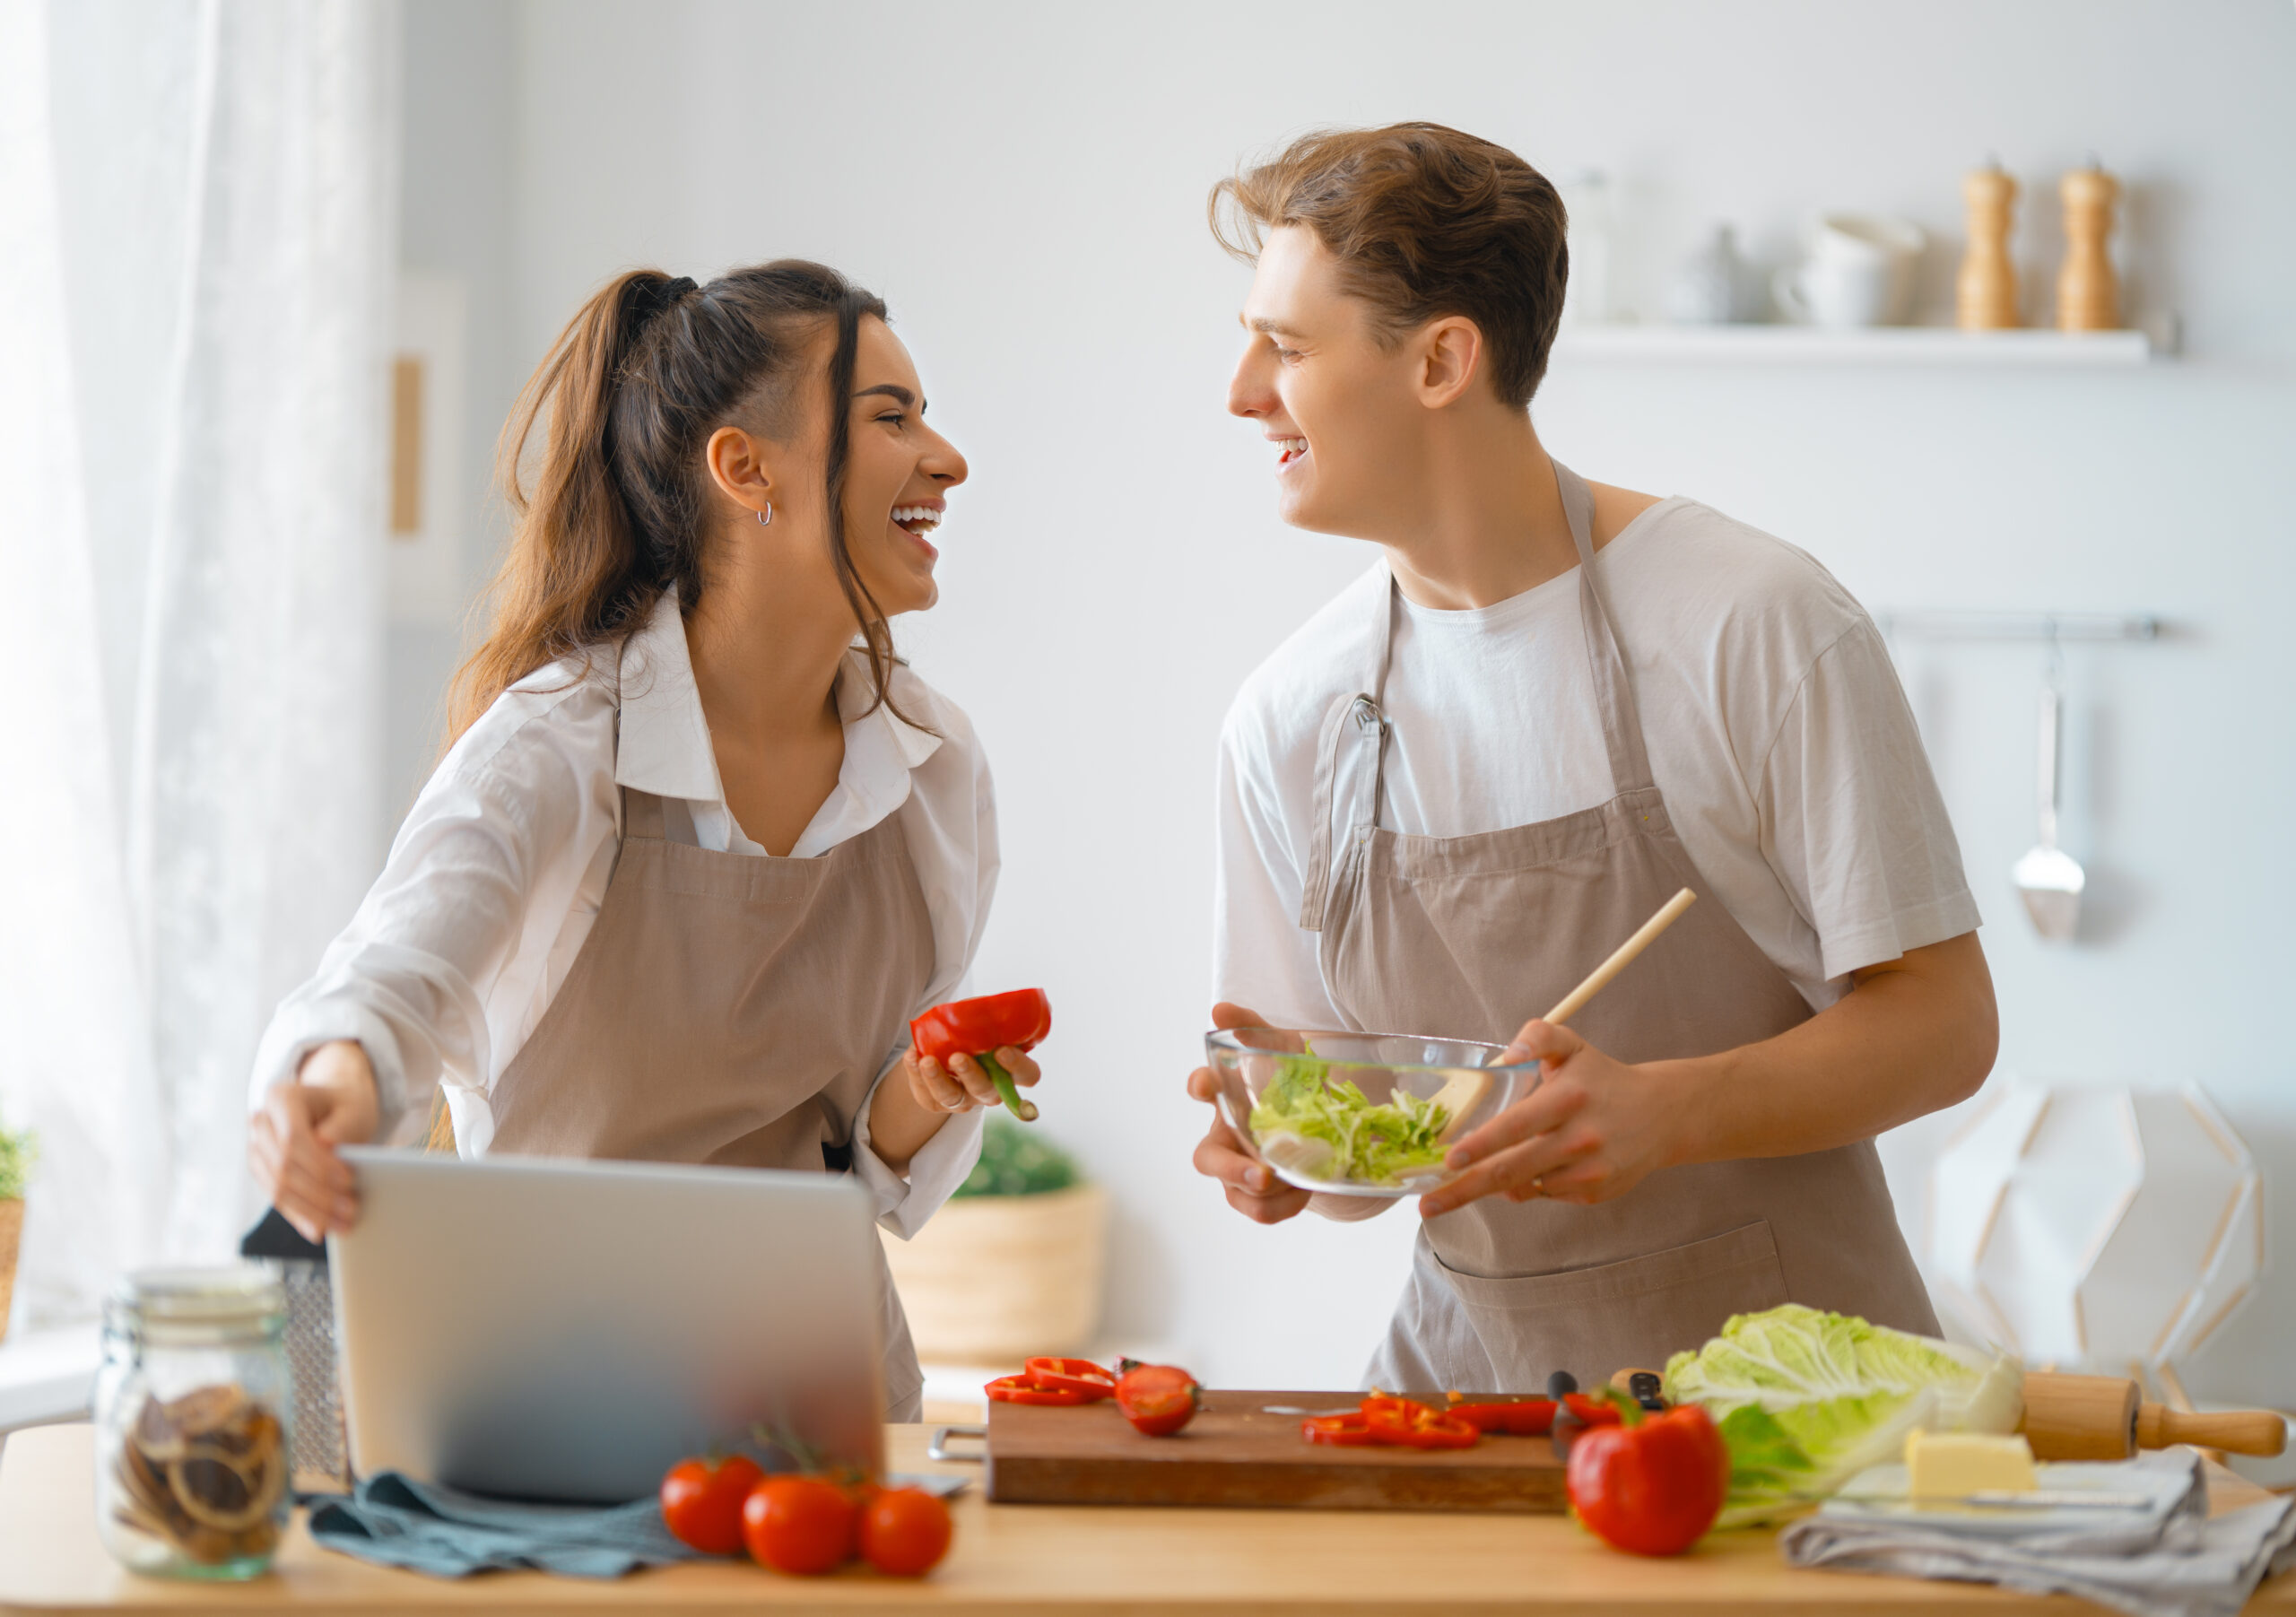 Couples’ Wellness: Prioritizing Health and Happiness Together